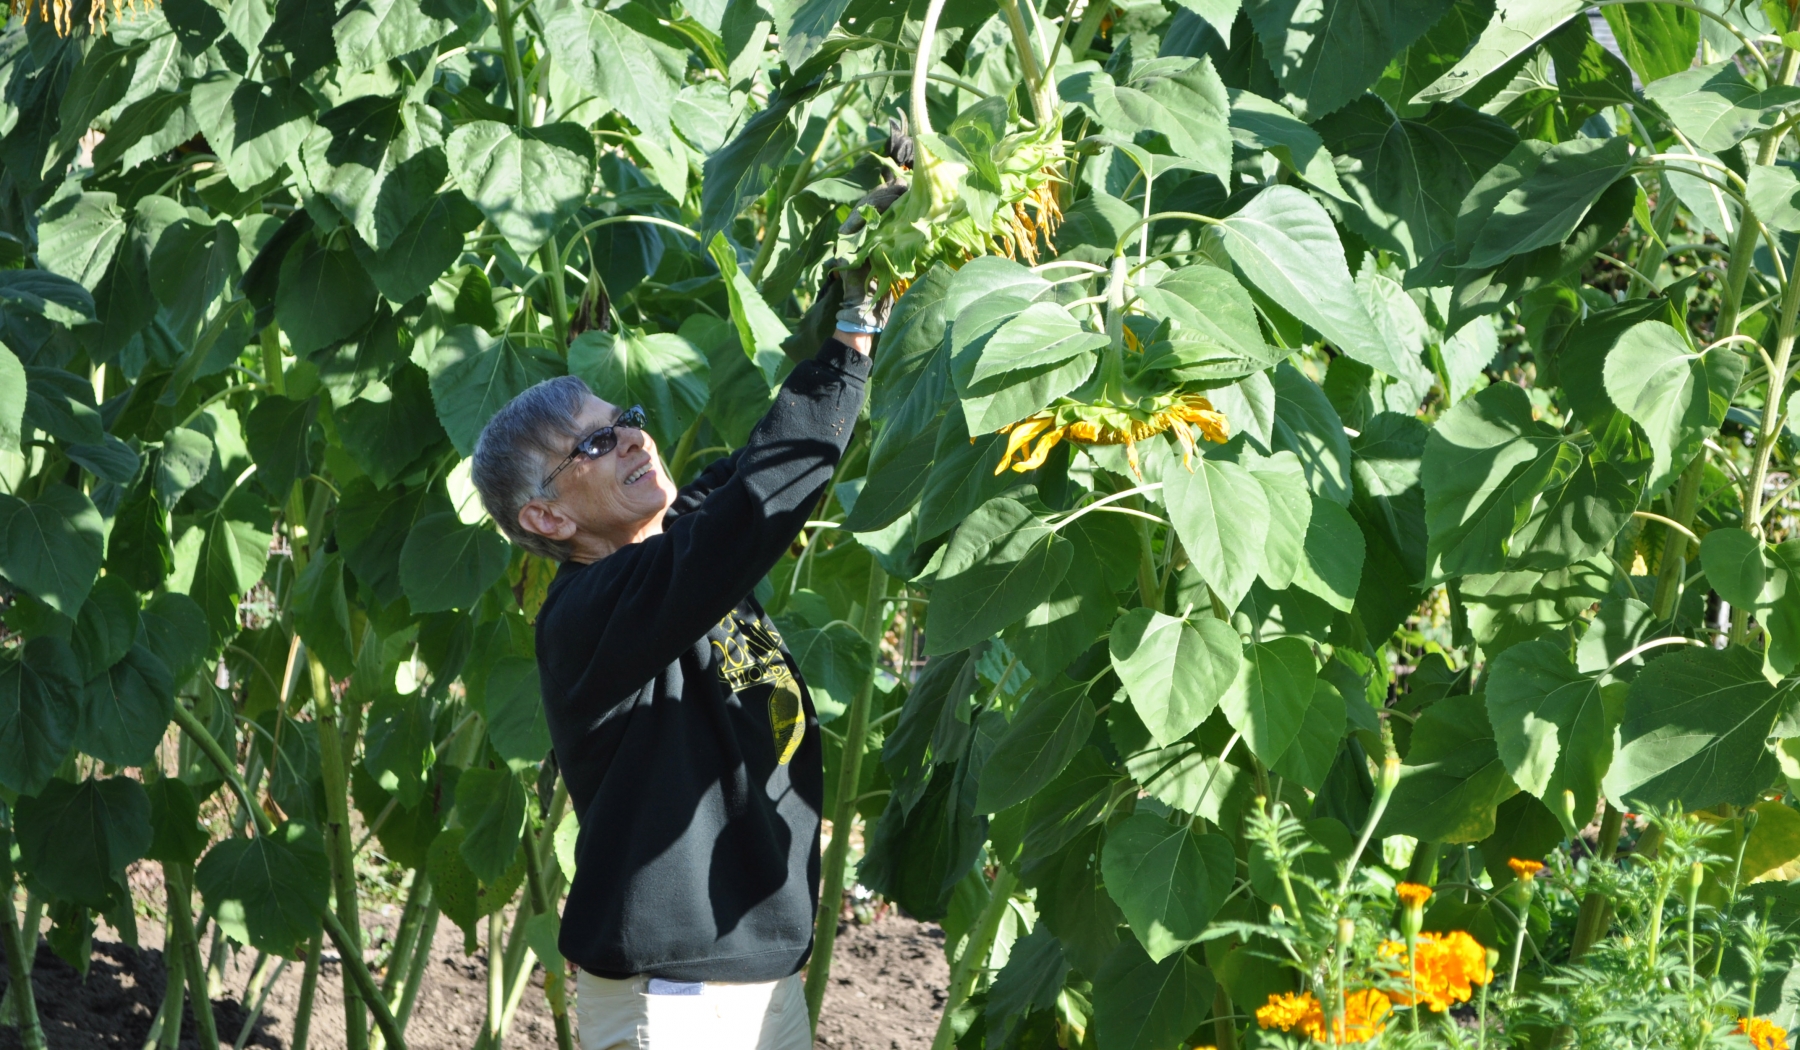 Sister Anne McNulty harvests healthy food for people in need in Syracuse, NY.